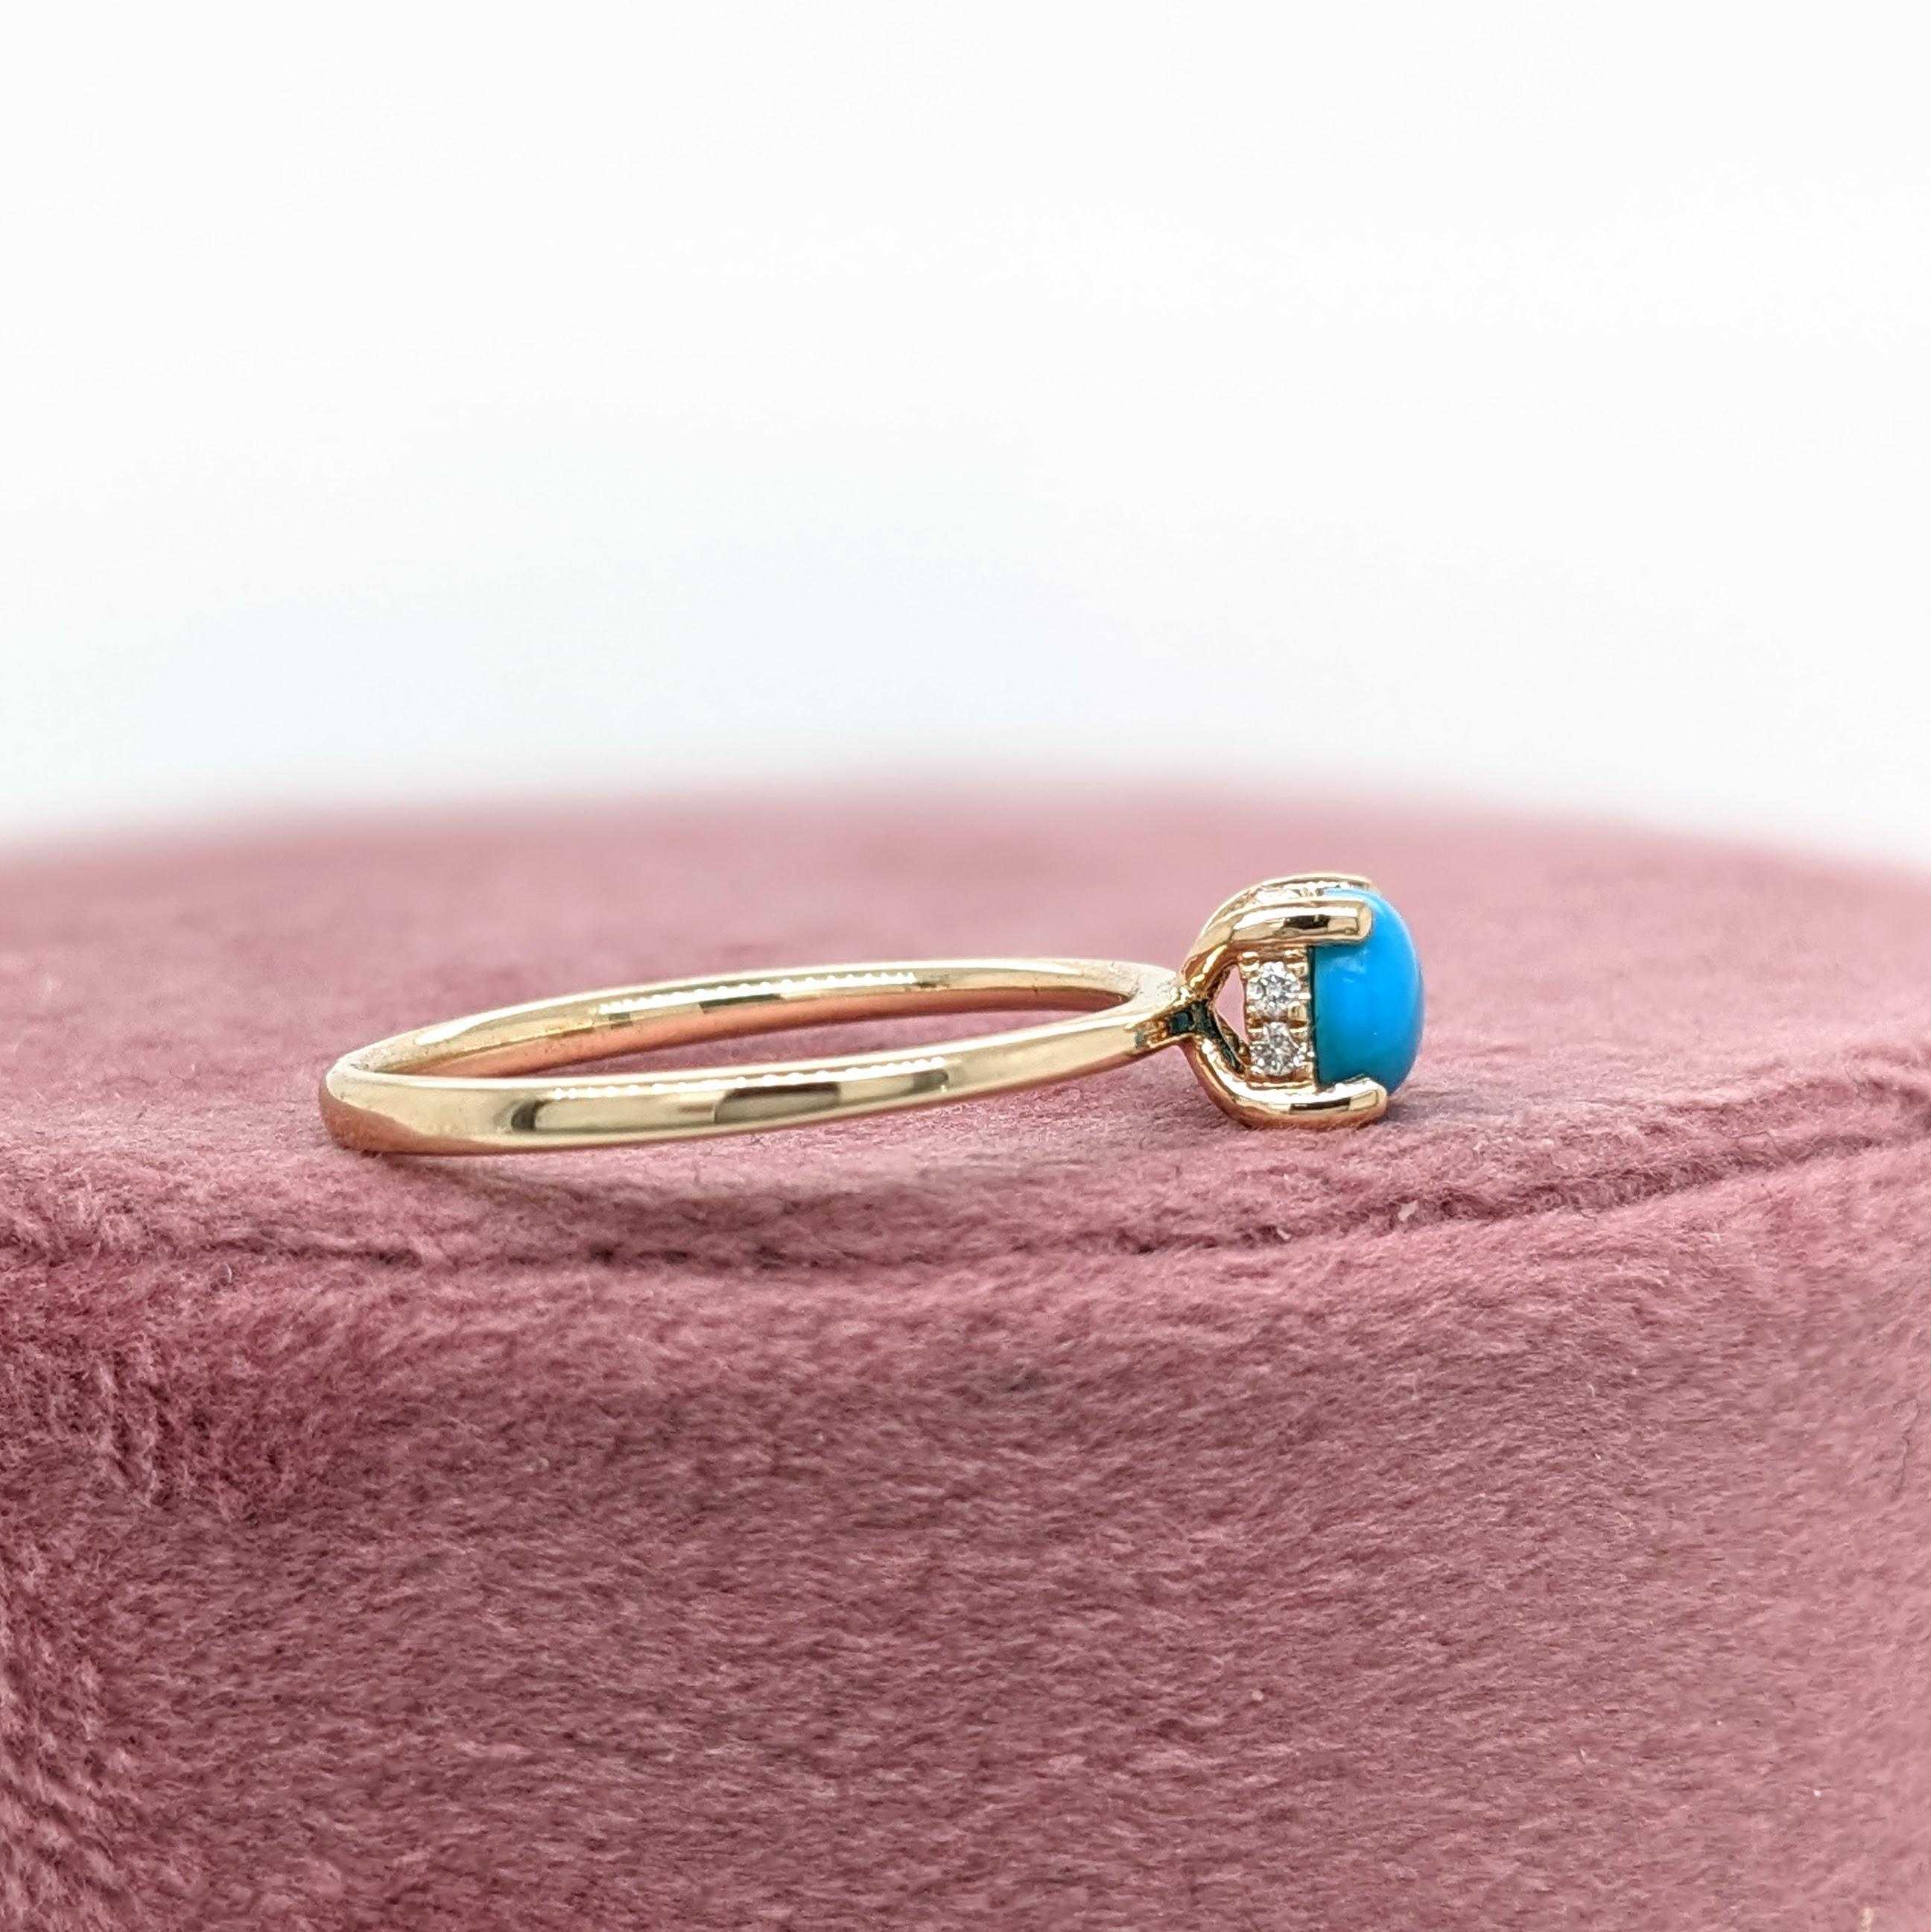 Turquoise Ring w Earth Mined Diamonds in Solid 14K Yellow Gold Round 5mm For Sale 1